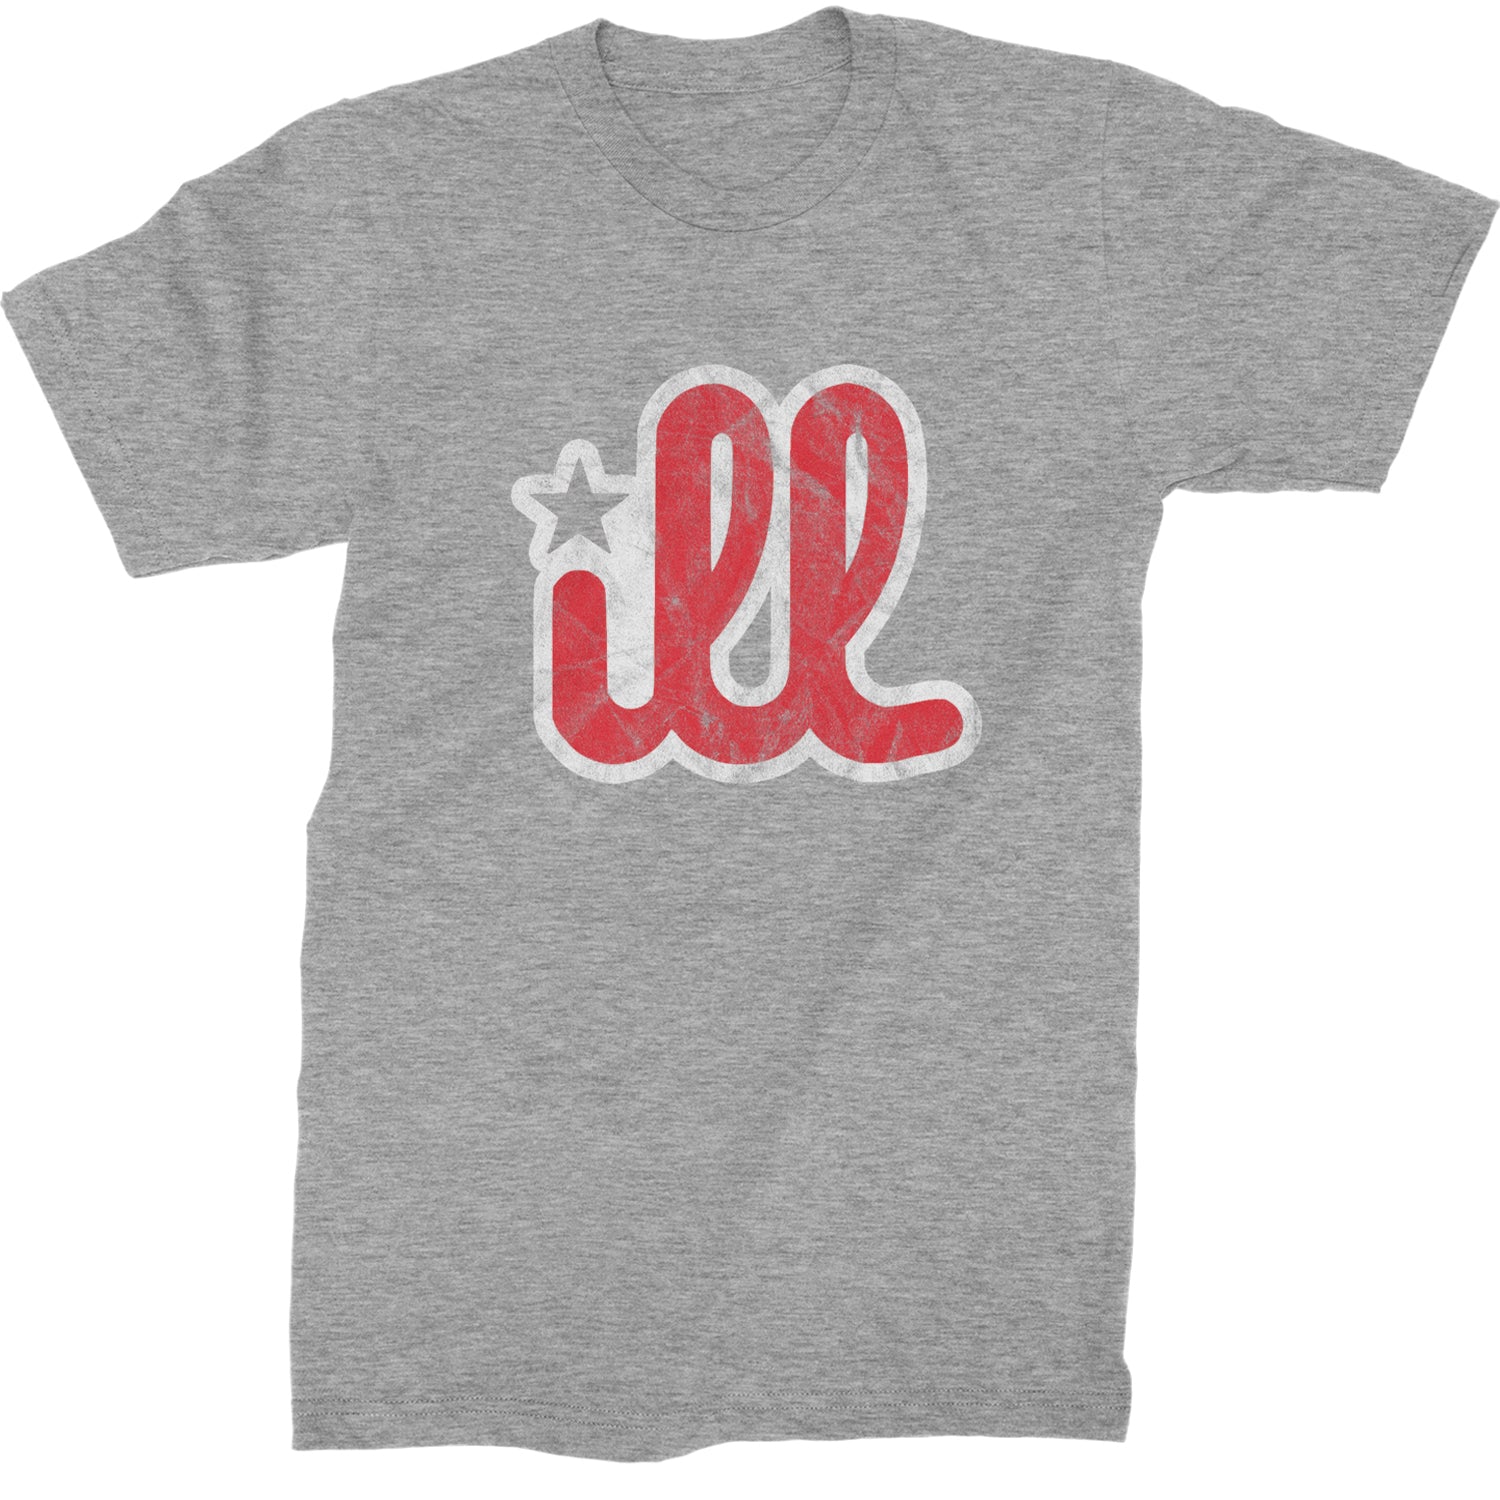 ILL Vintage It's A Philadelphia Philly Thing Mens T-shirt Heather Grey